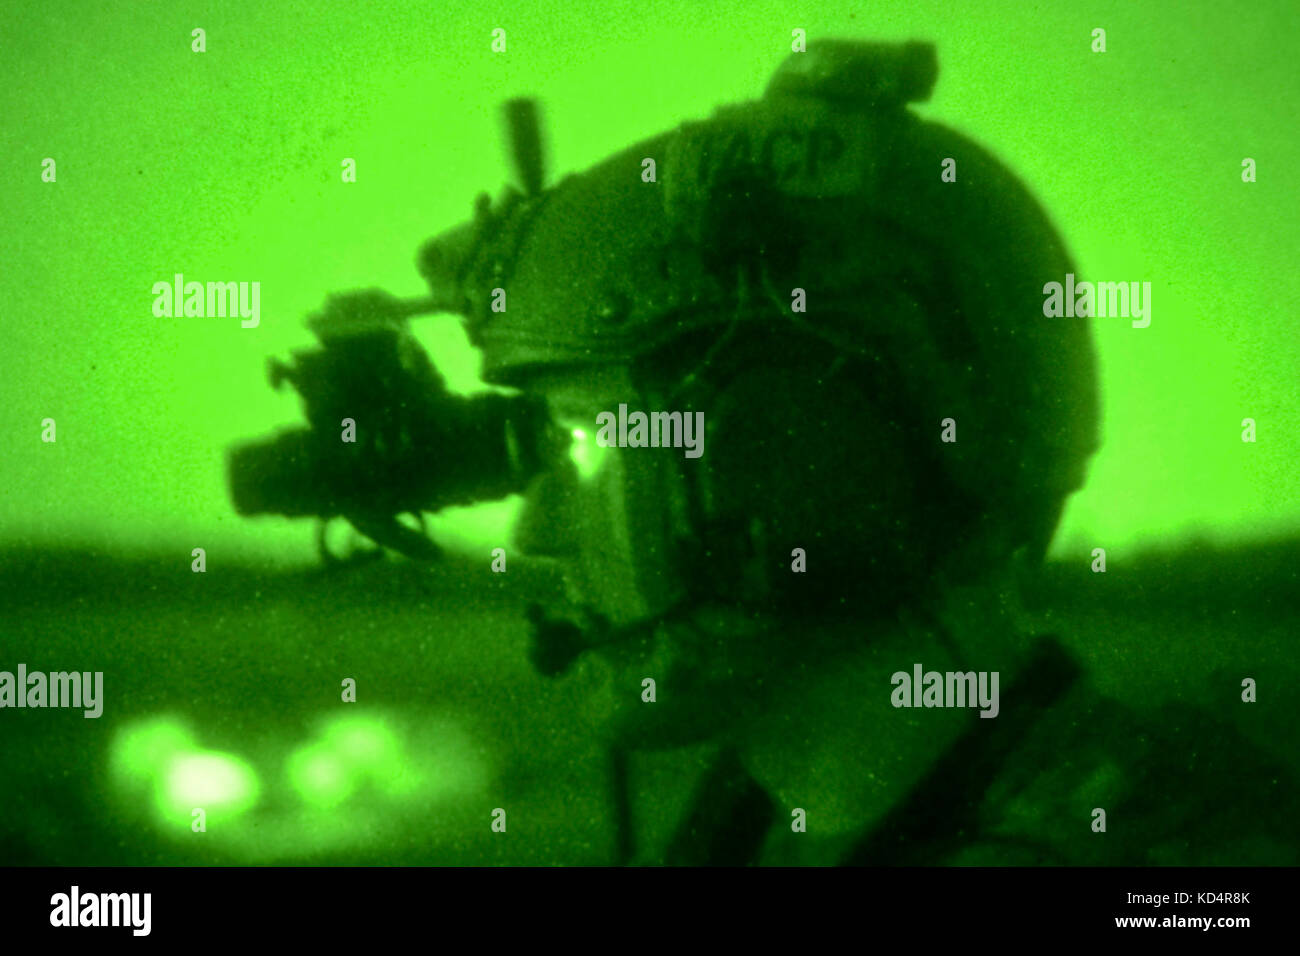 A U.S. Air Force Joint Terminal Attack Controller assigned to the 22nd Special Tactics Squadron looks through his night vision as he conducts close air support operations at Poinsett Electronic Combat Range on Shaw Air Force Base, S.C., May 21, 2014.  Elements of the South Carolina Army and Air National Guard, U.S. Army and U.S. Air Force special operations, and Columbia Police Department S.W.A.T., conducted nighttime training, which allowed special operations forces and the National Guard to conduct joint urban assault training. (U.S. Army National Guard photo by Sgt. Brian Calhoun/Released) Stock Photo